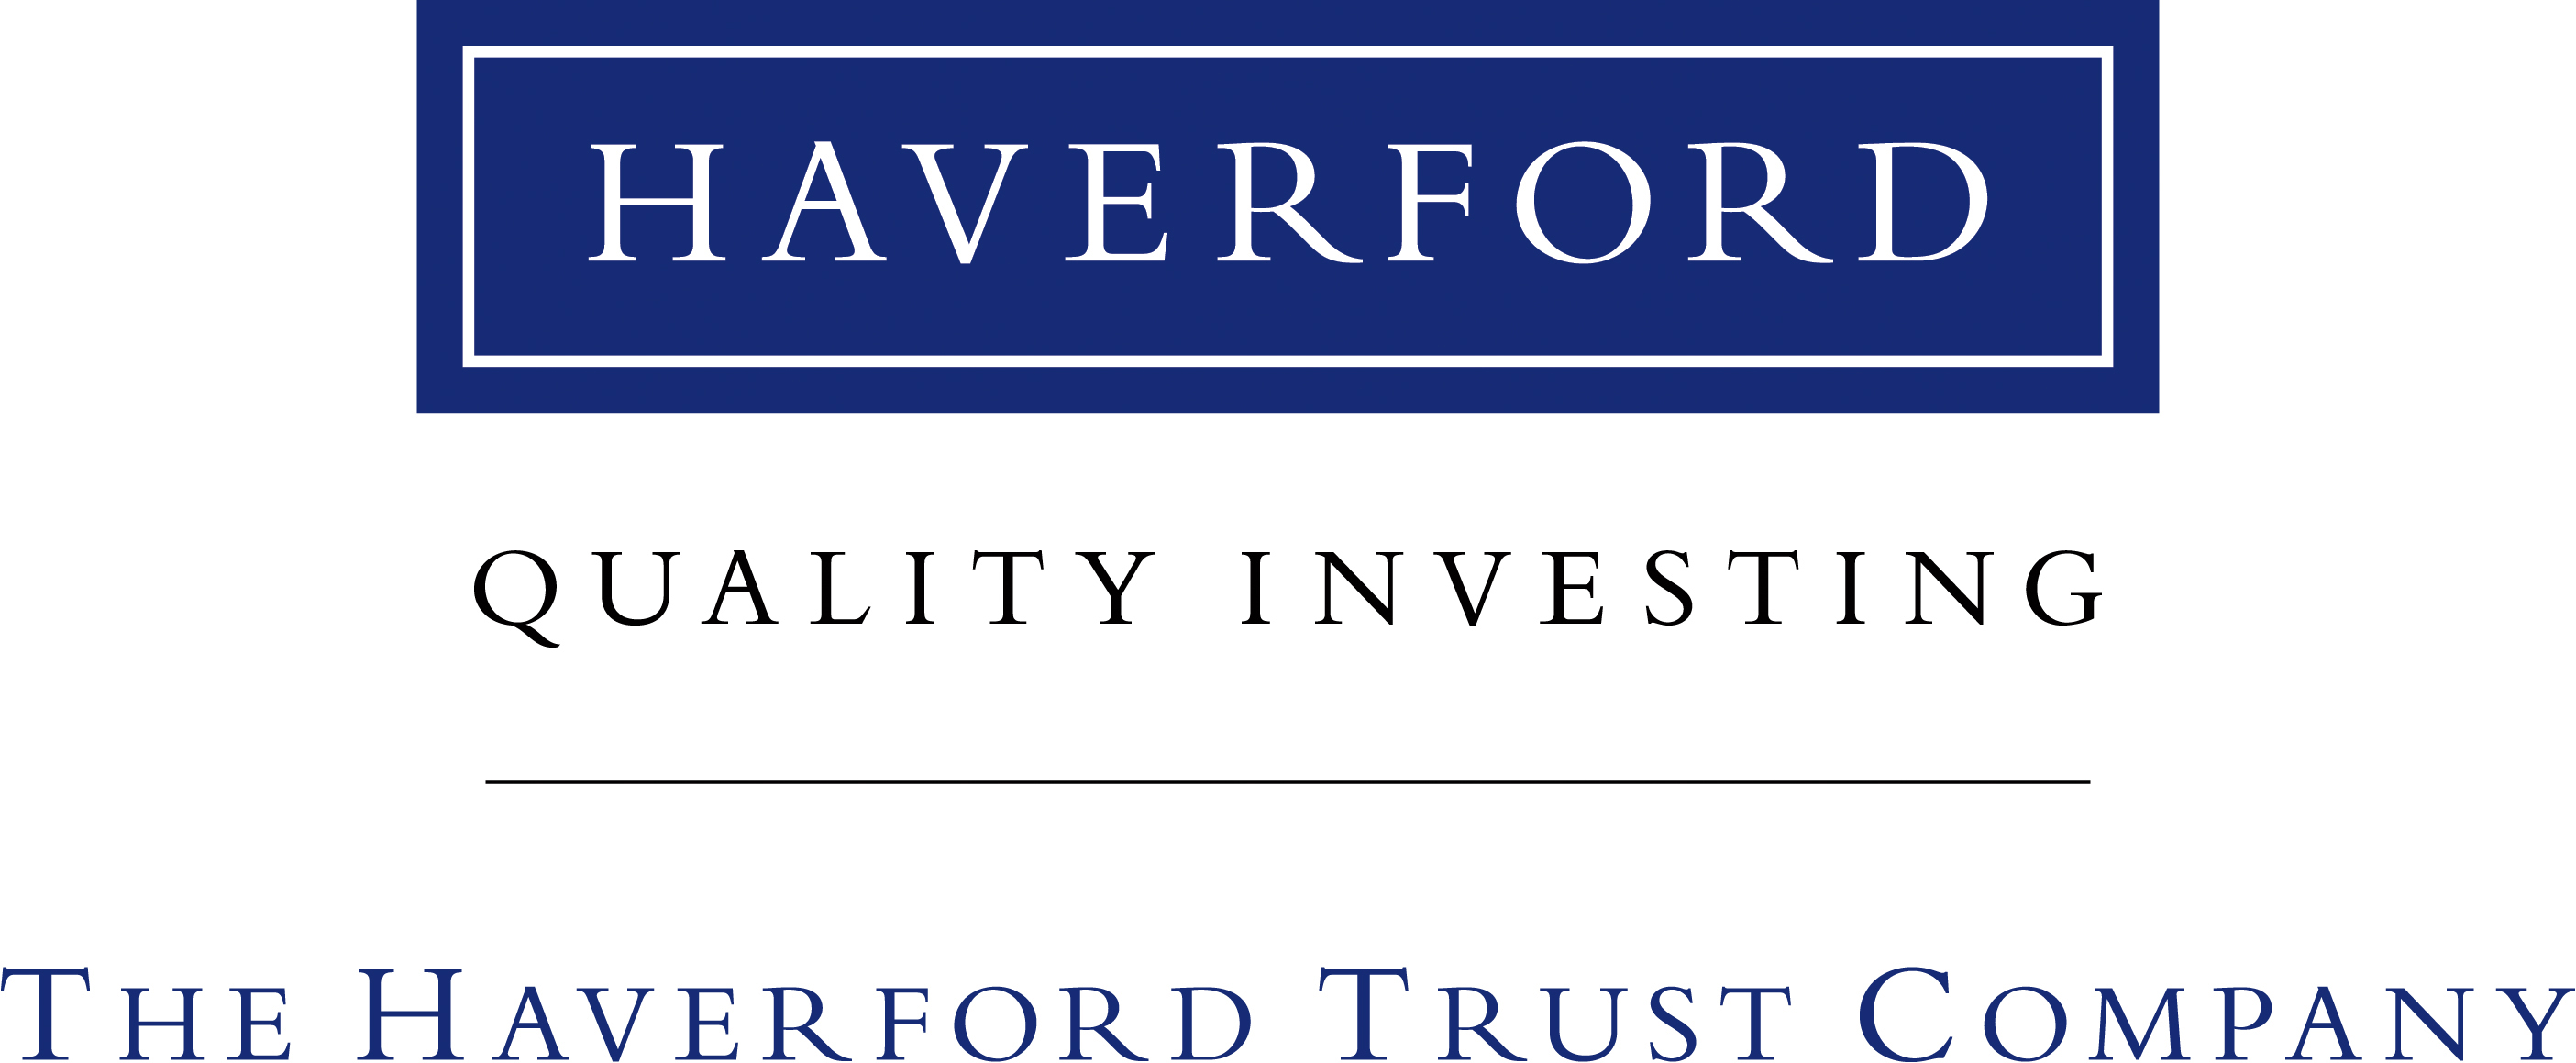 Haverford Quality Investing